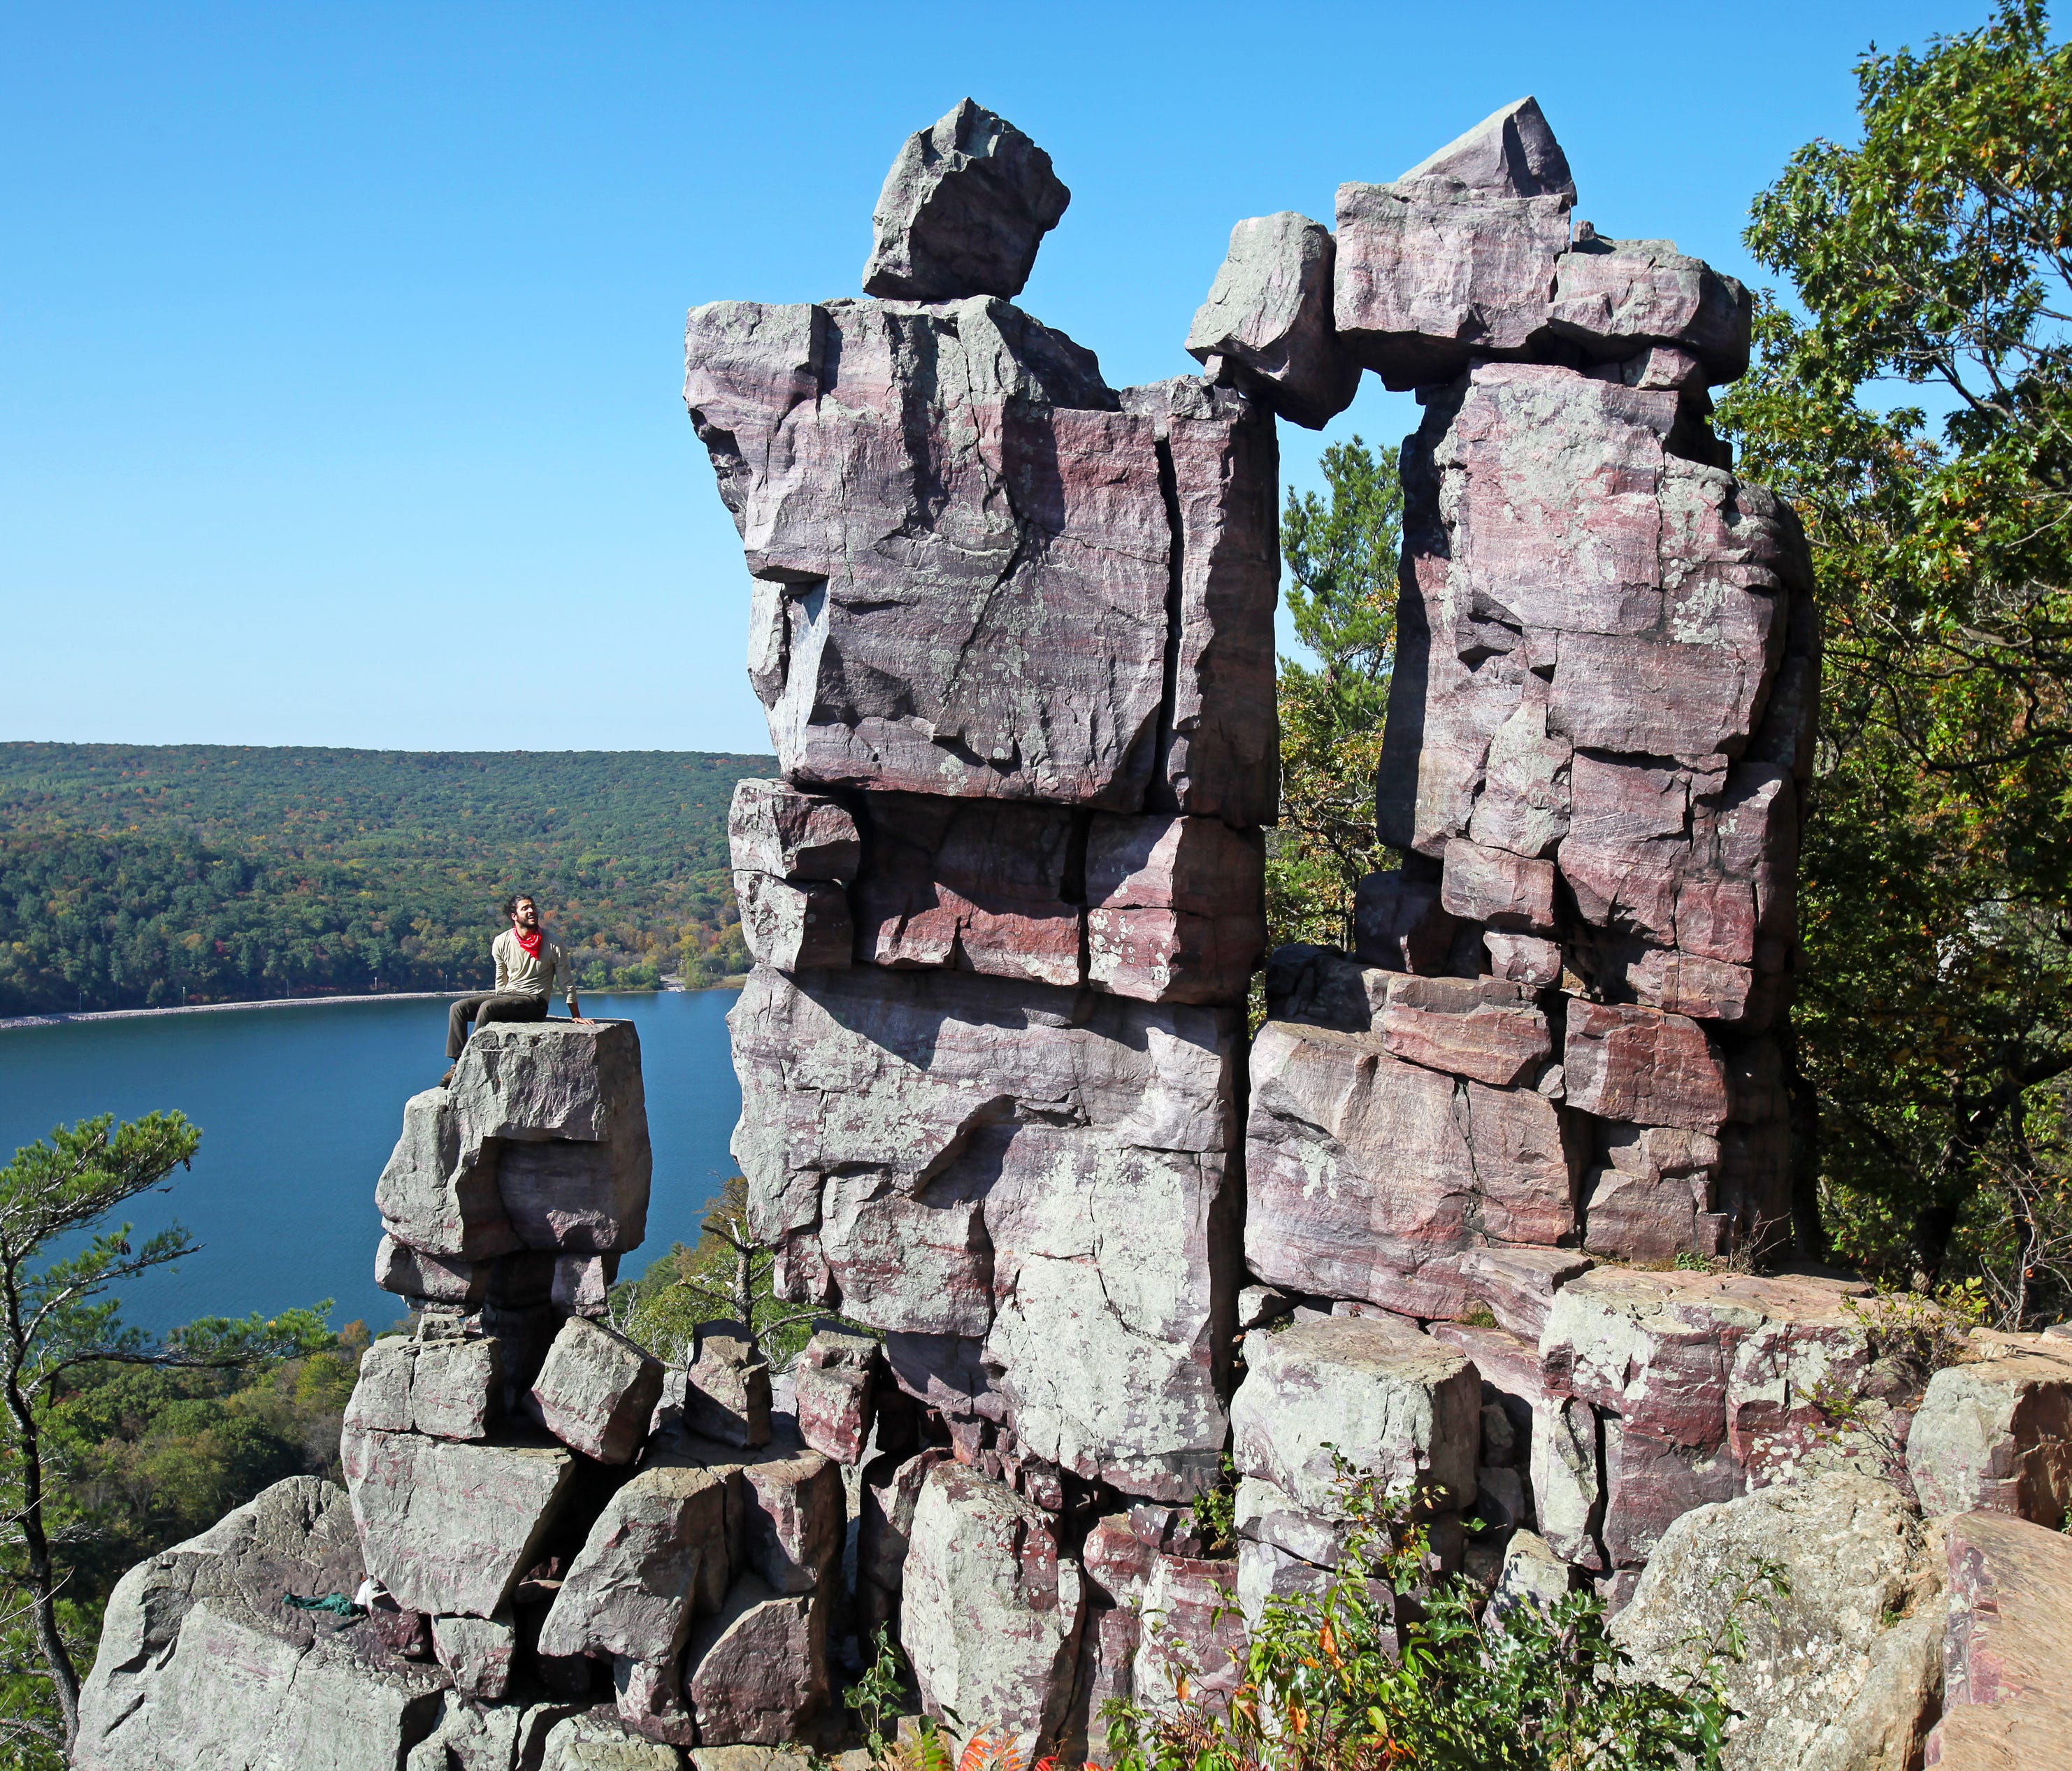 The Devil's Doorway is one of a handful of distinctive rock formations at Devil's Lake State Park near Baraboo.